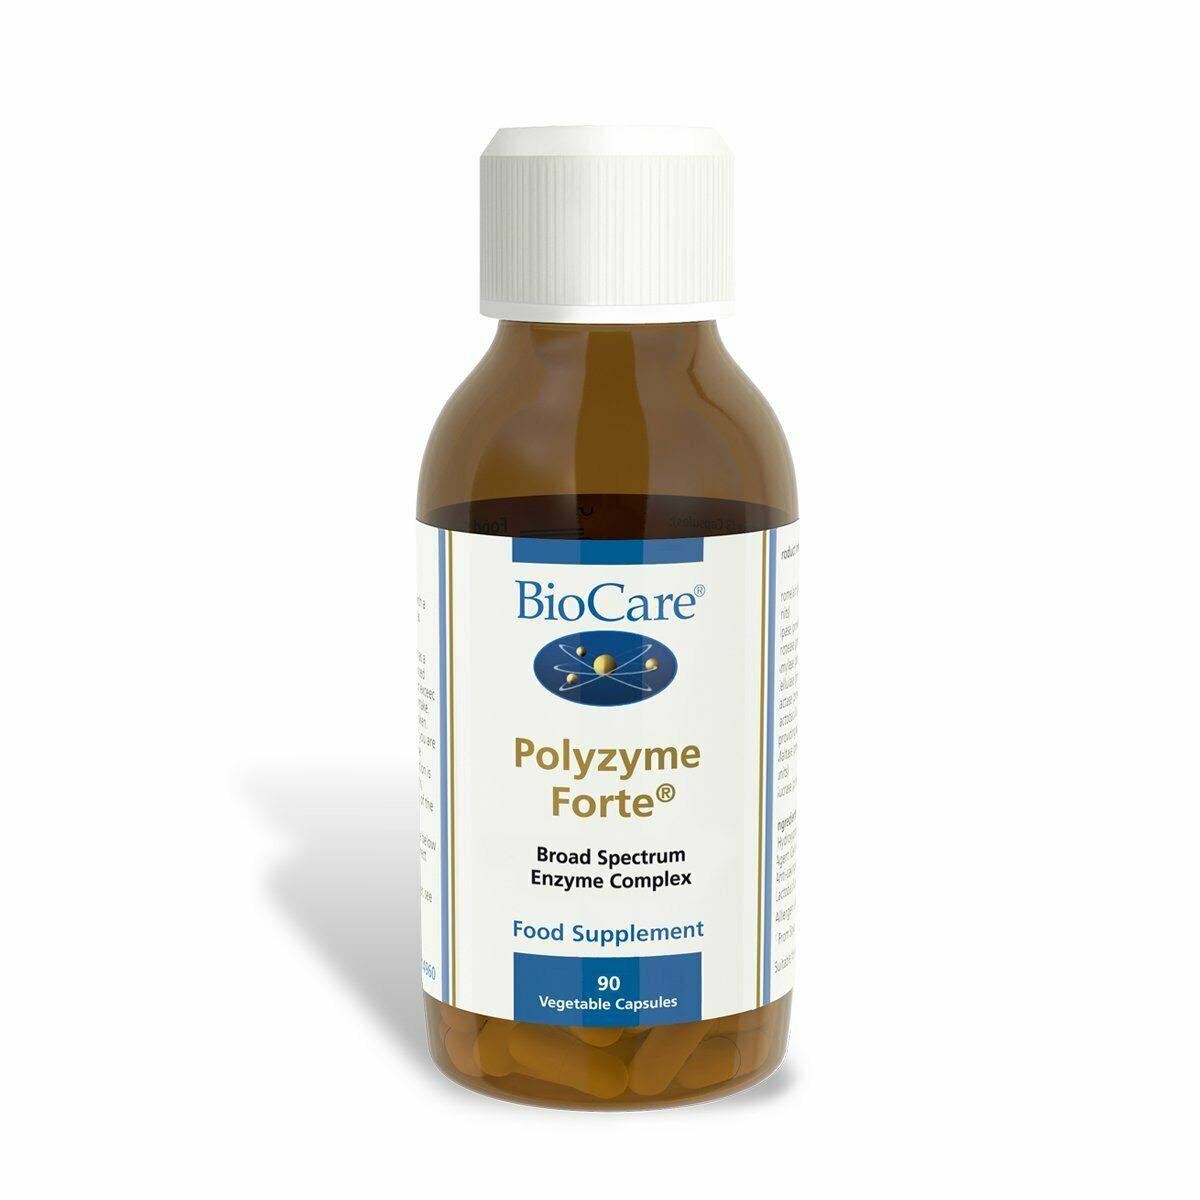 BioCare Polyzyme Forte Food Supplement - 90 Capsules